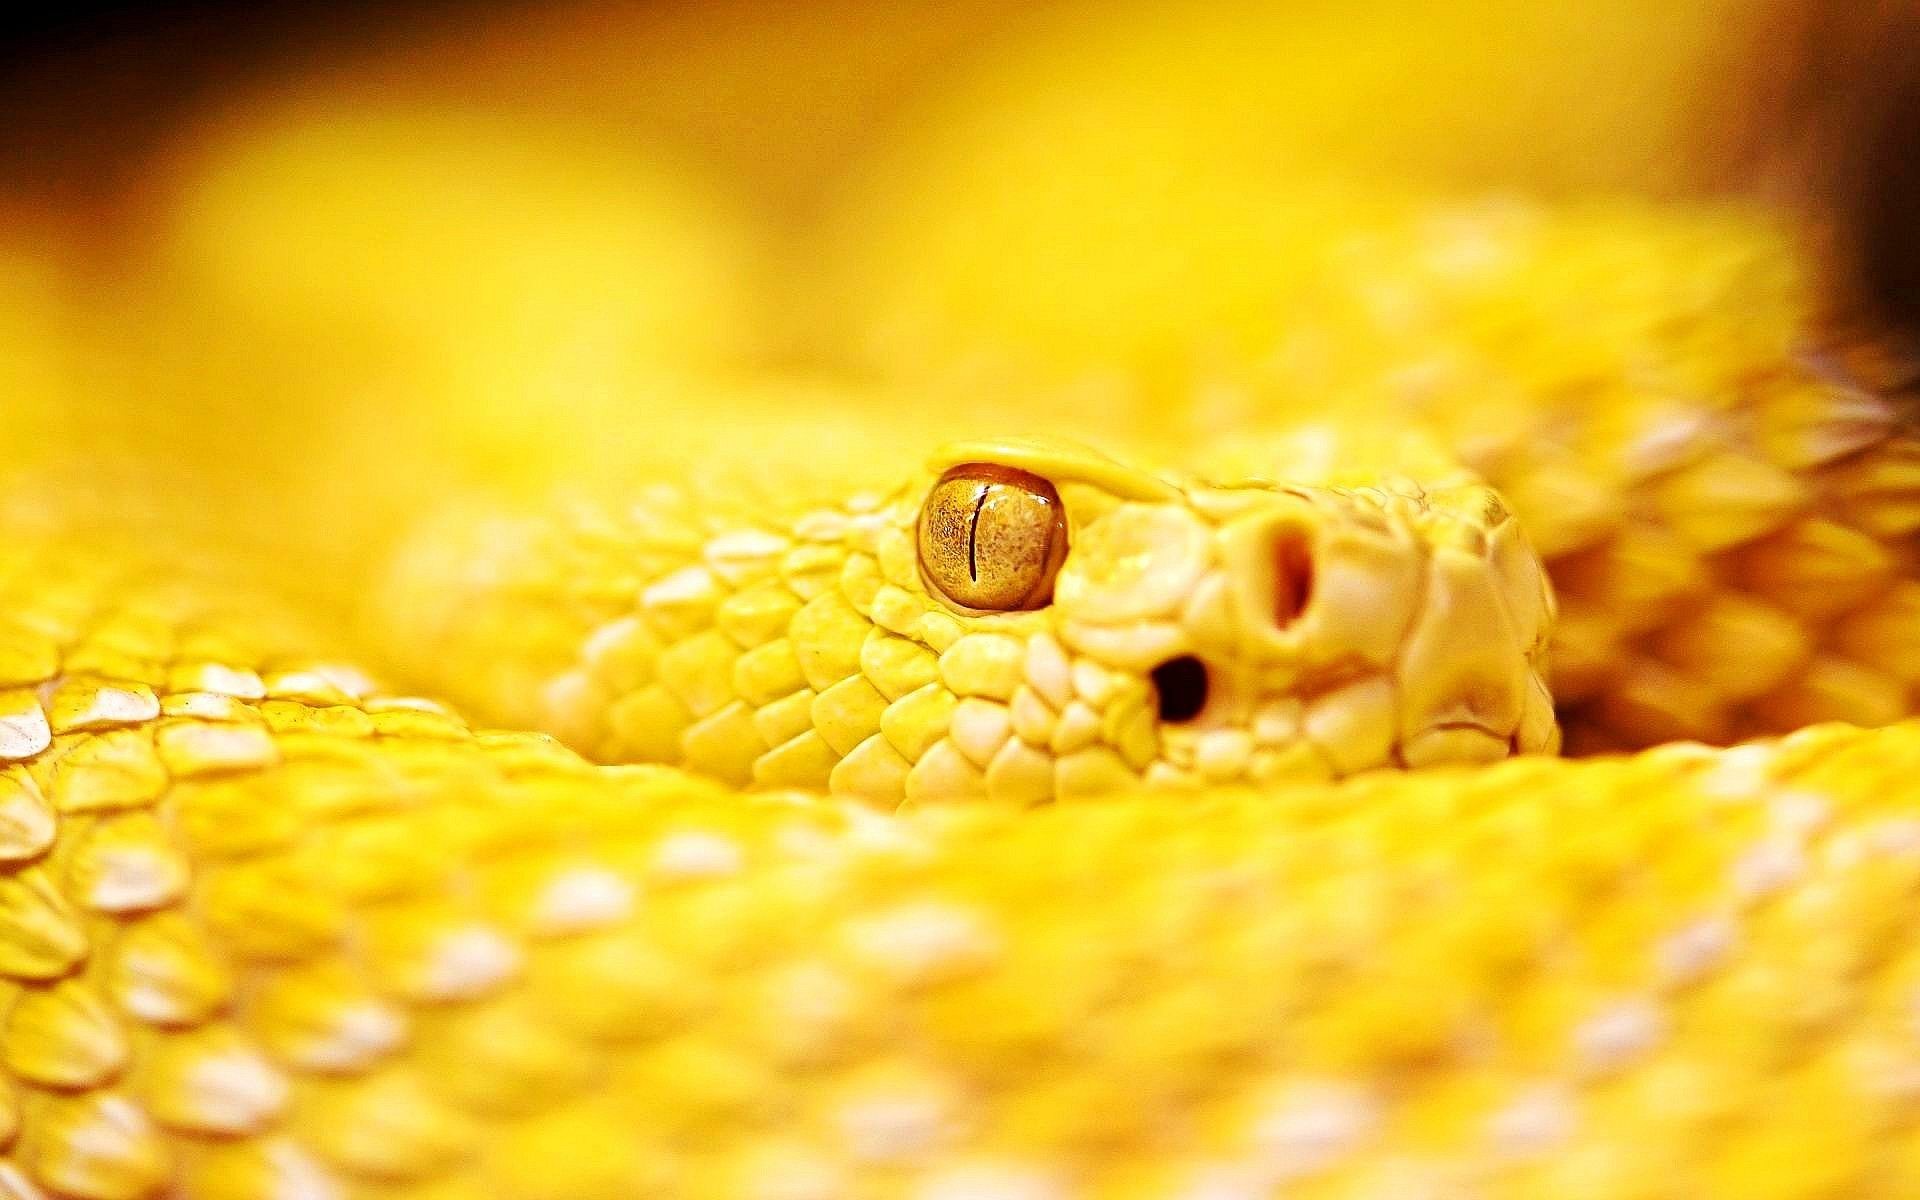 1920x1200 Snakes High Quality Wallpapers - HD Wallpapers Blog | HD Wallpapers |  Pinterest | High quality wallpapers